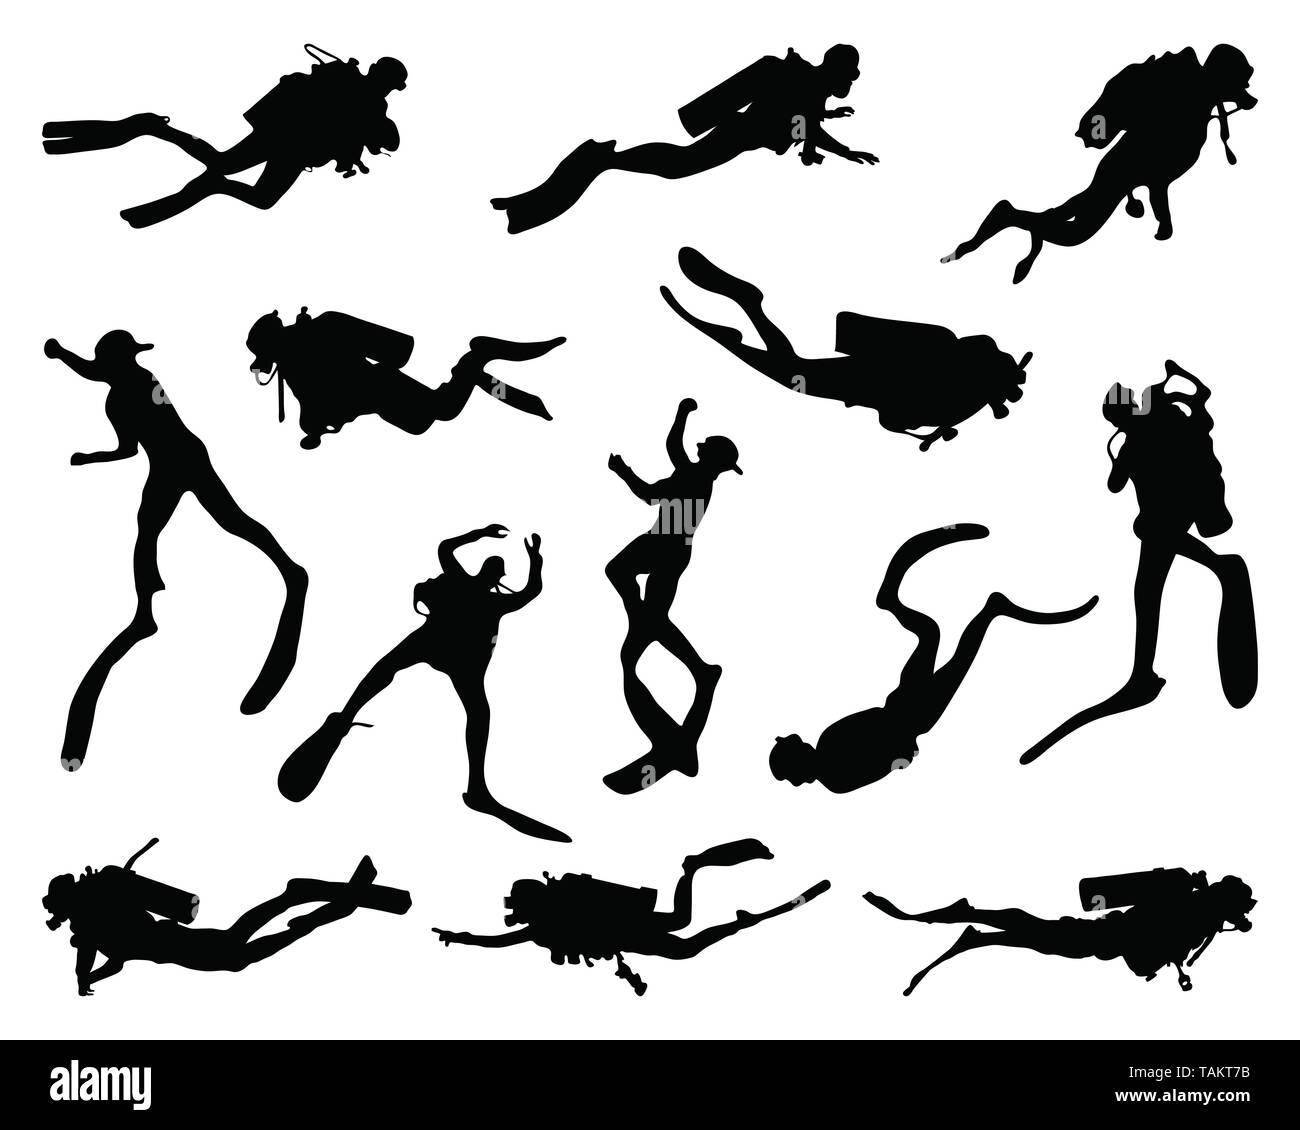 Black silhouettes of divers on a white background Stock Photo